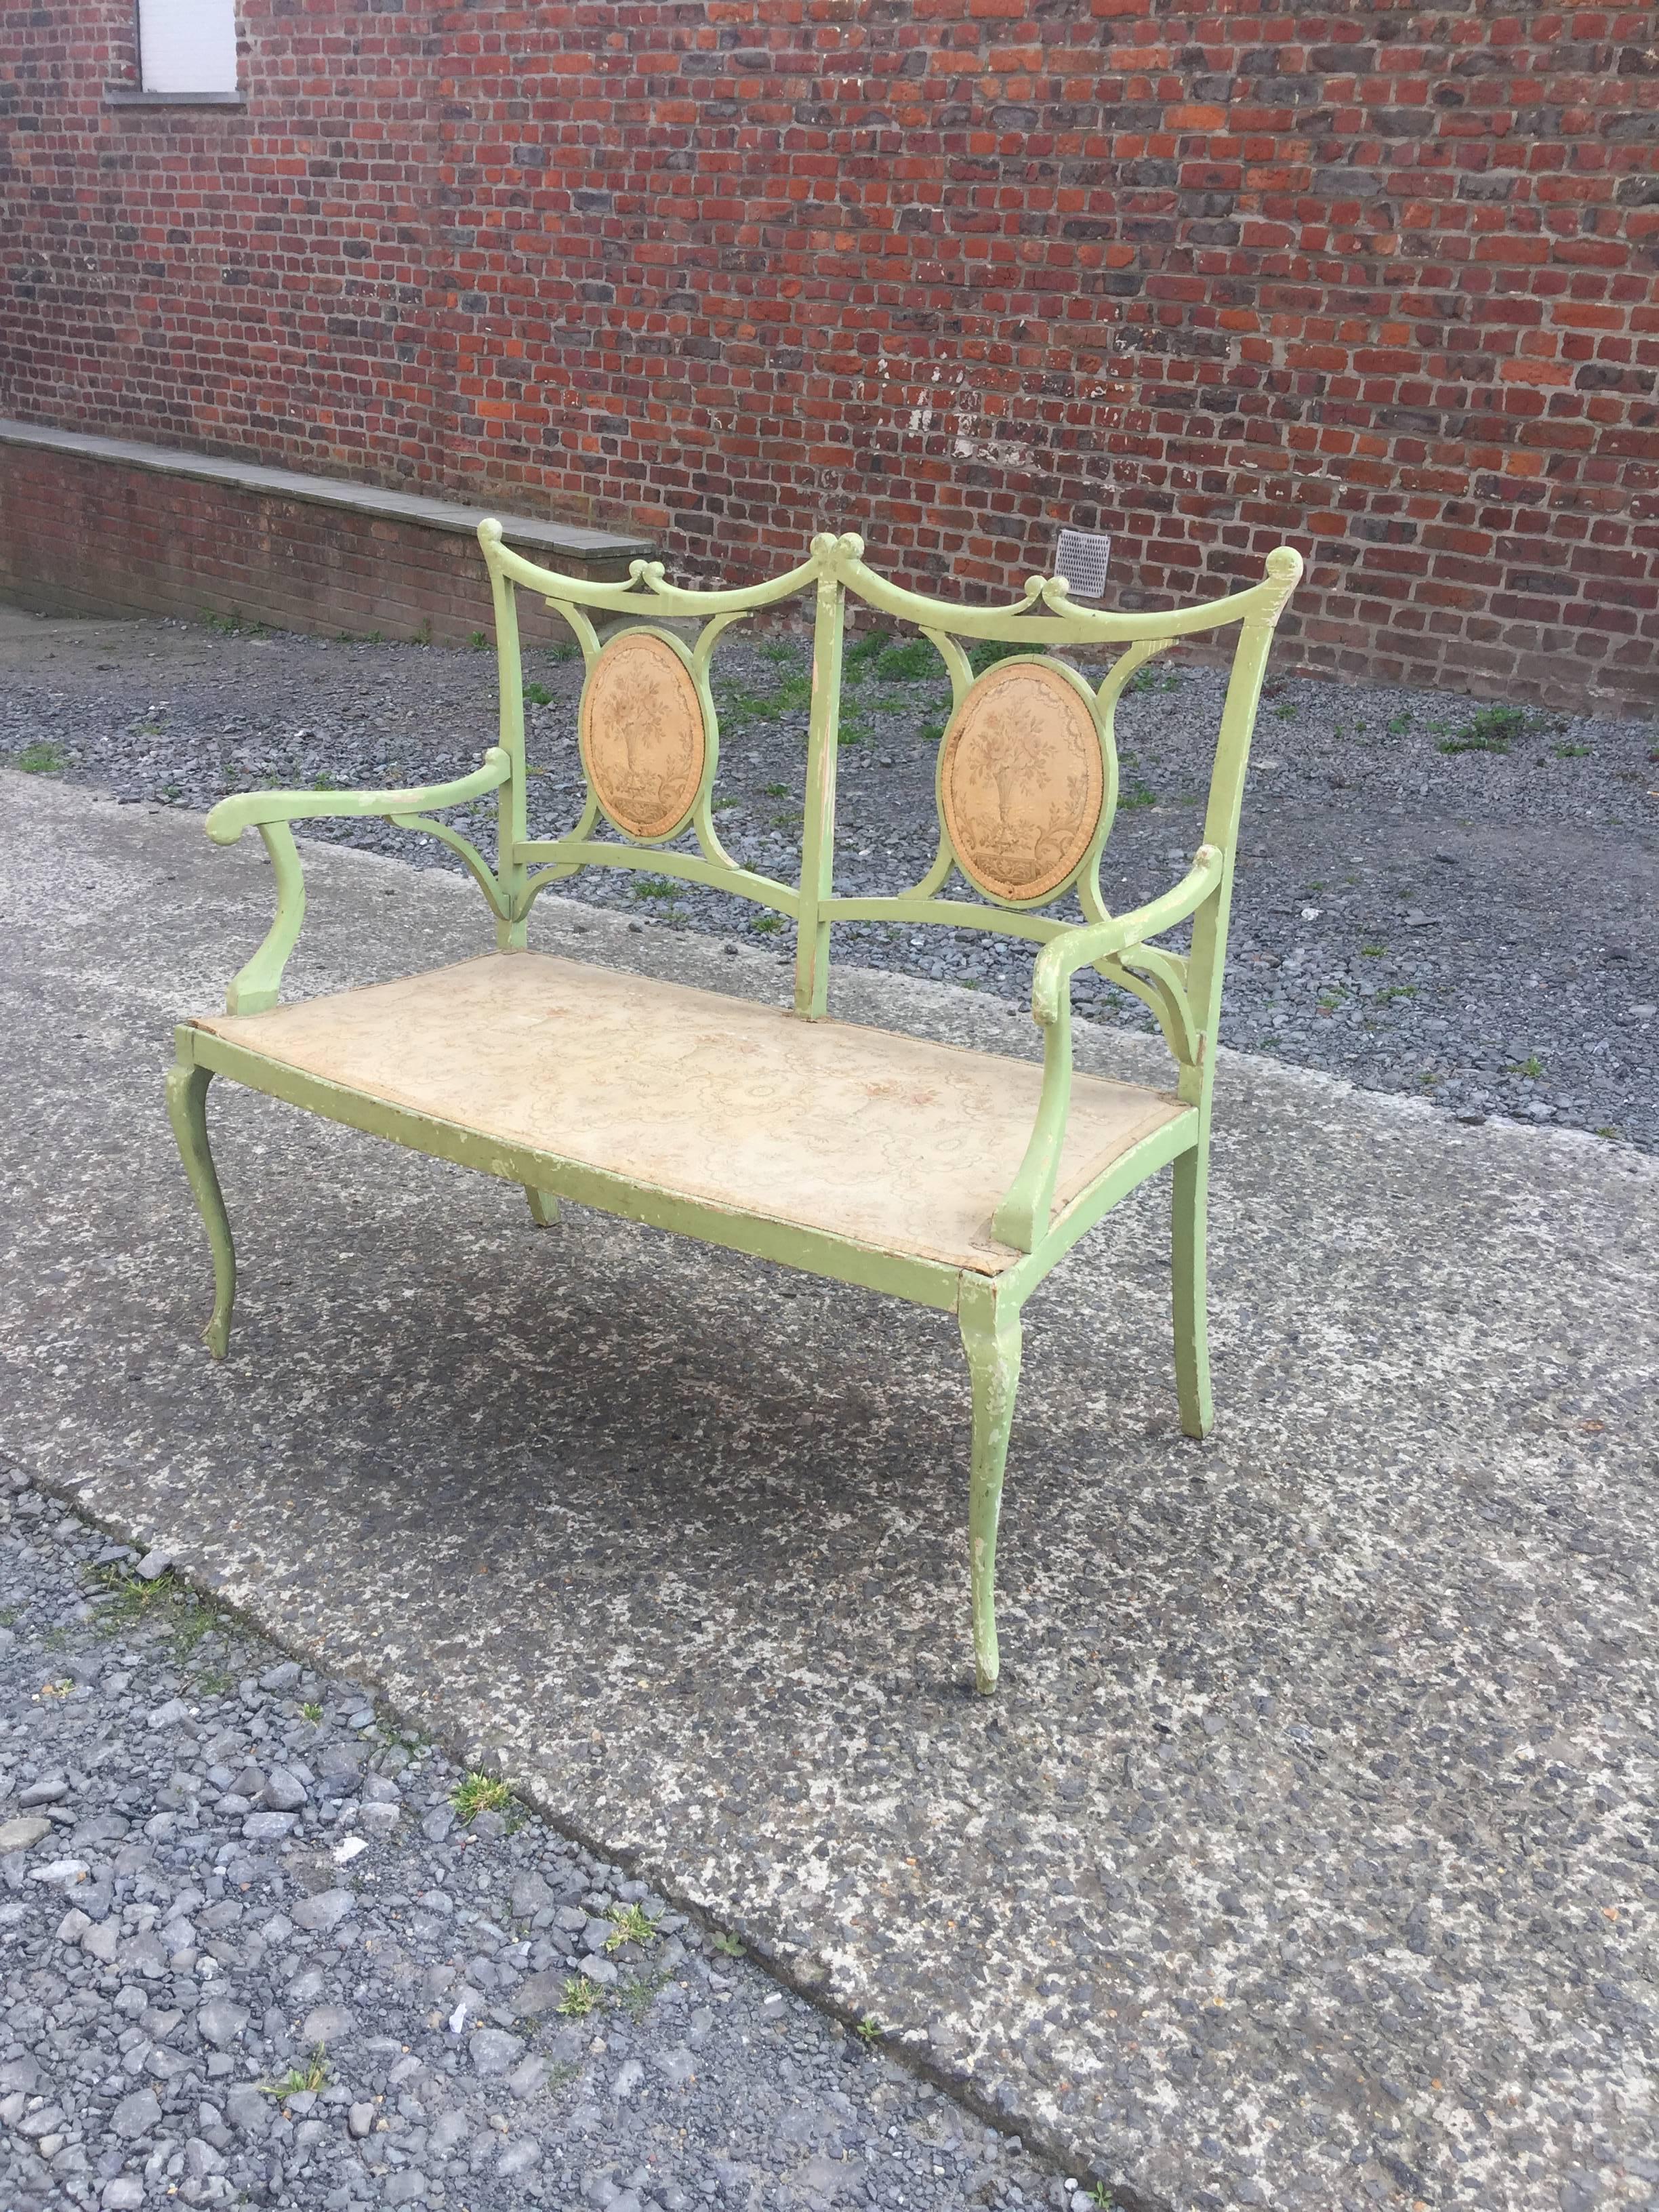 Lovely Art Nouveau bench in lacquered wood, circa 1900.
To be restored.